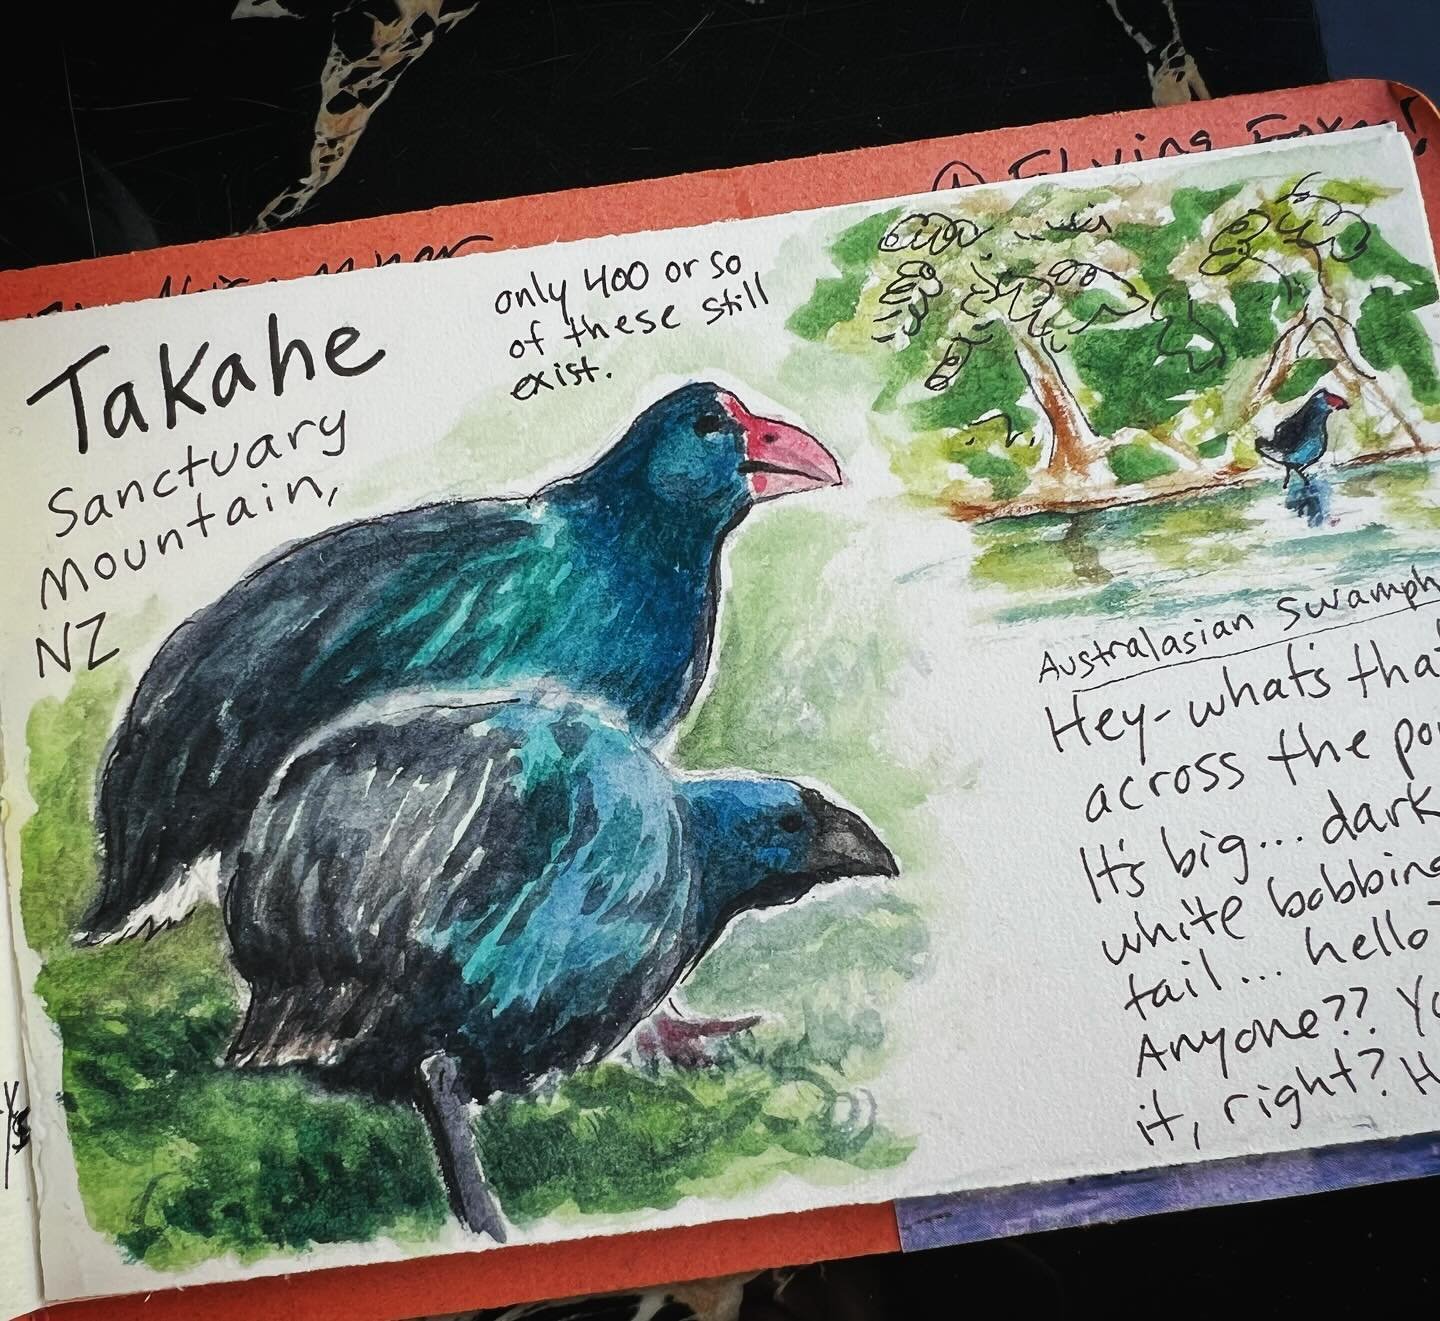 One of the highlights of this trip was seeing the Takahe at Sanctuary Mountain in NZ. They are extremely endangered and have a secure place to live here &amp; breed. Also saw an Australasian Swamphen- similar in basic appearance but not quite as rare